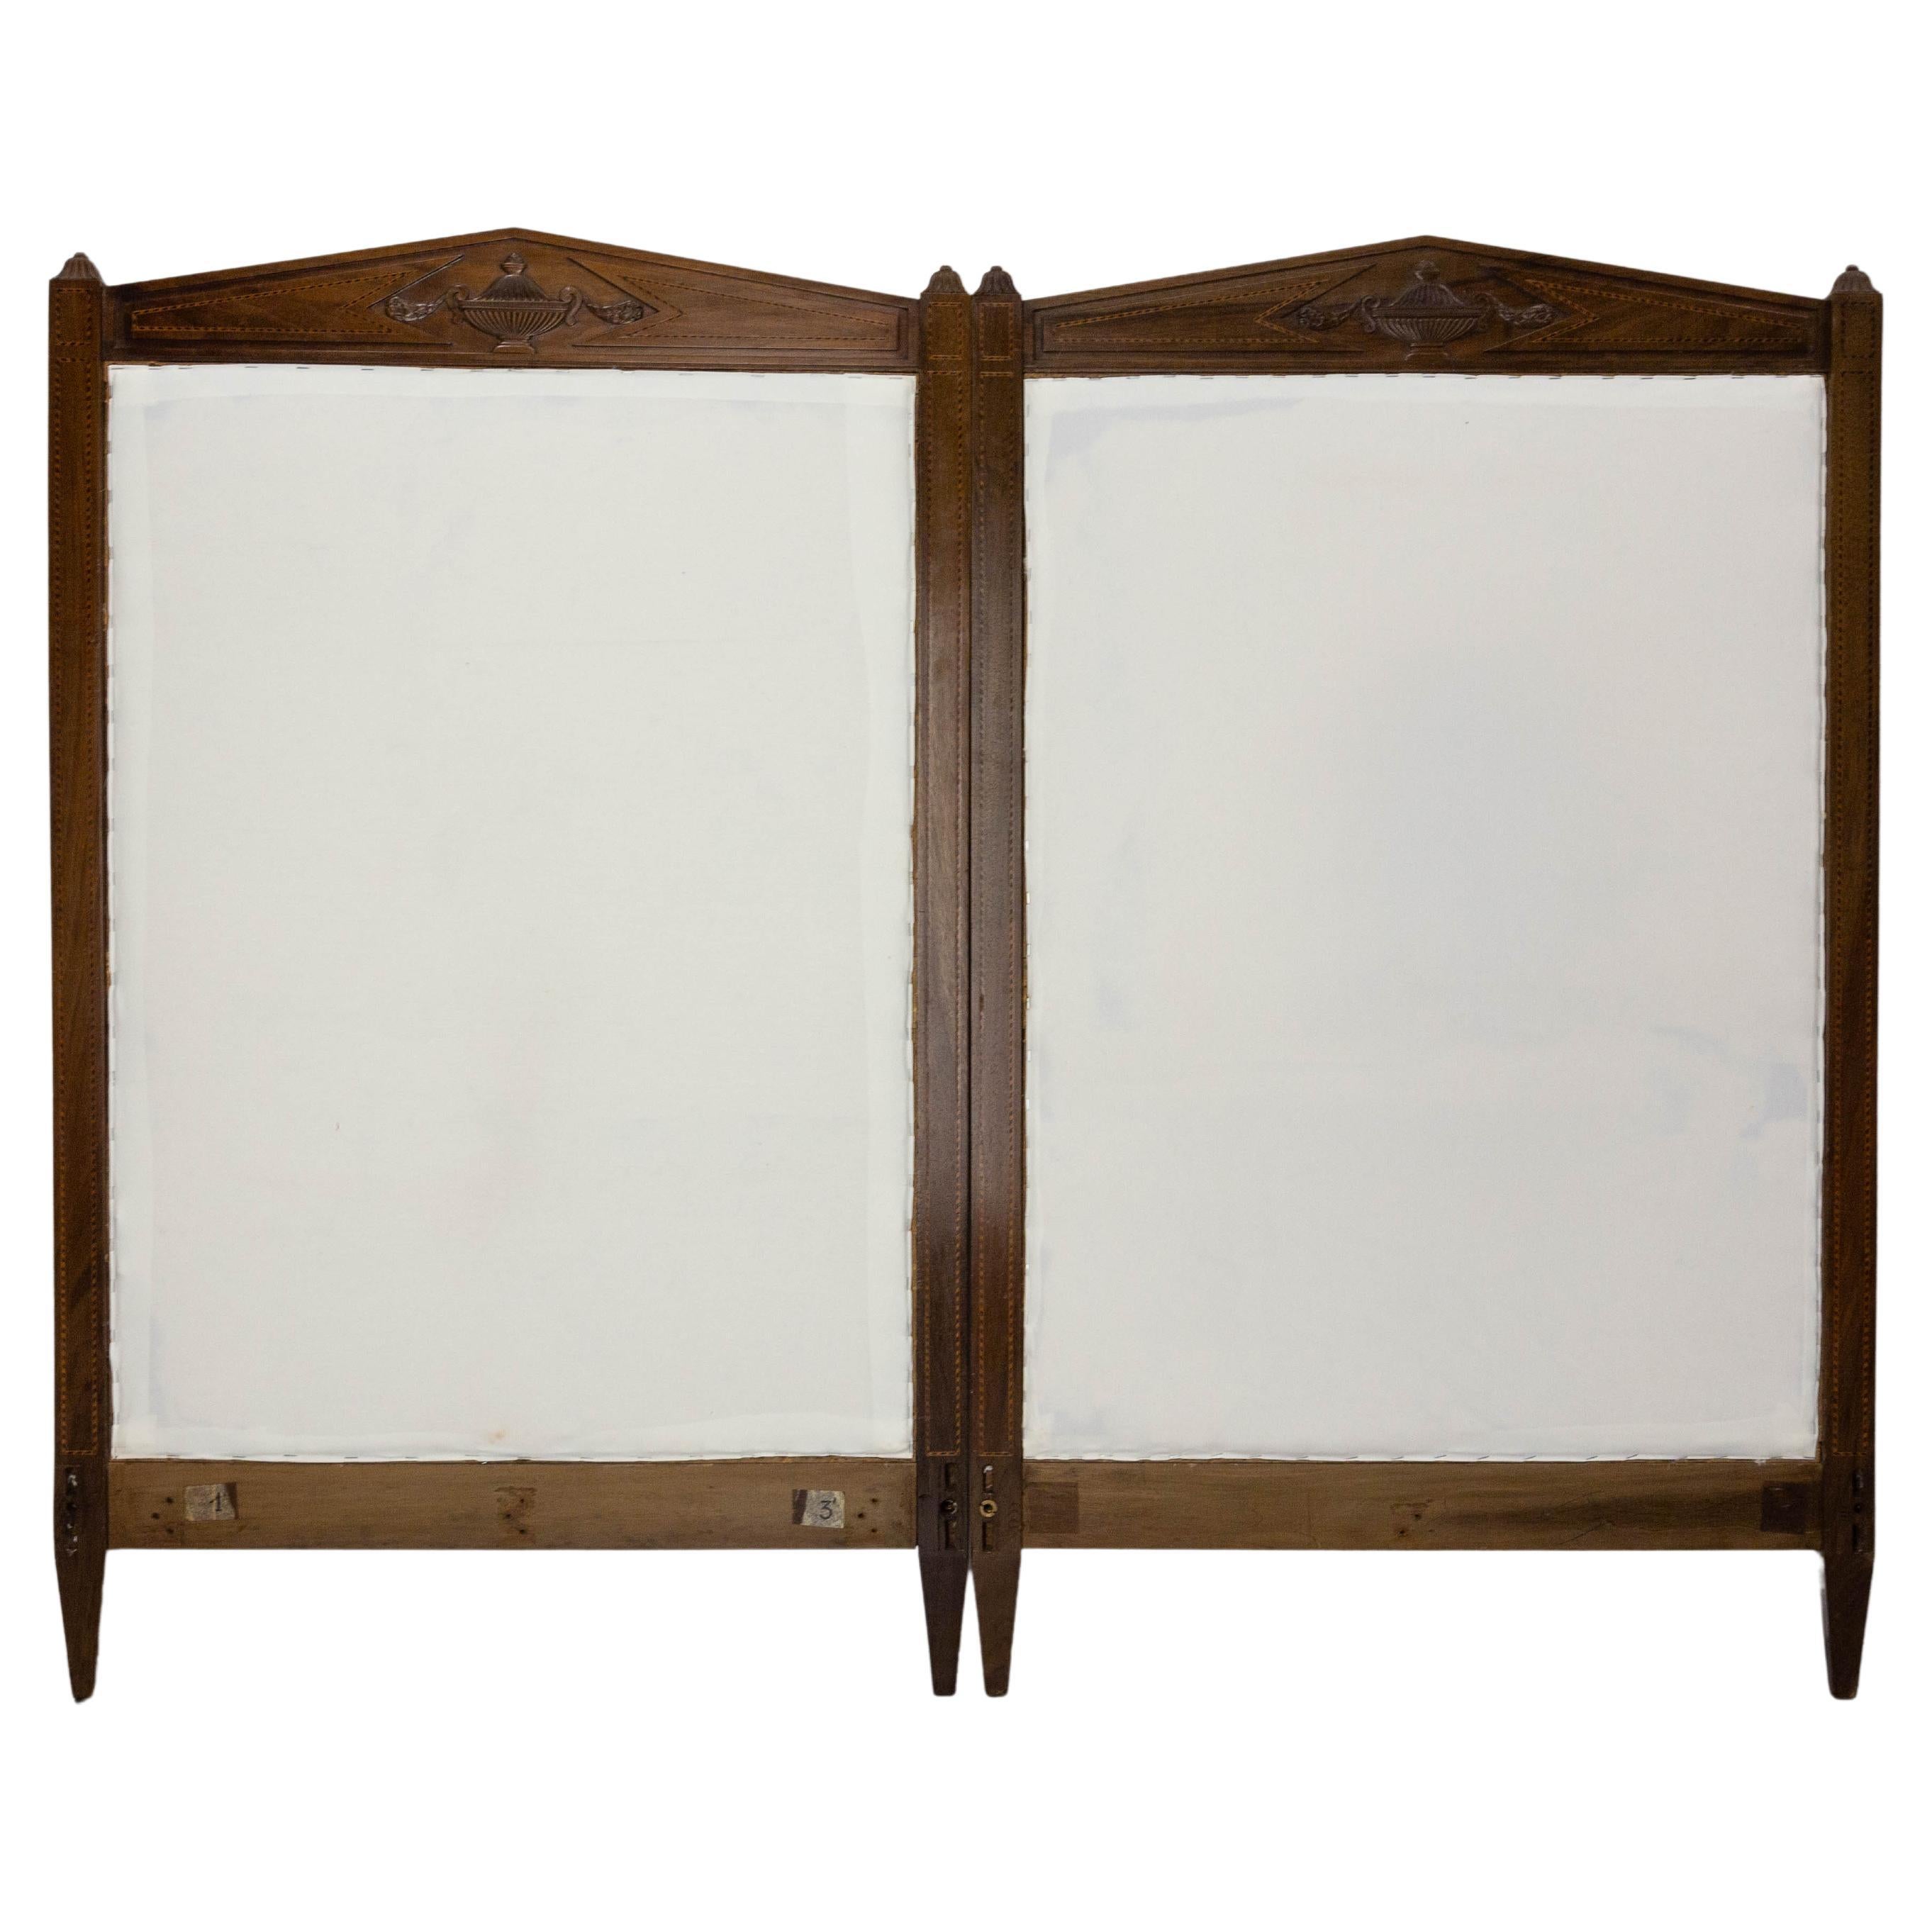 French Walnut Pair of Headboards with Marquetry Directoire Period, 1800